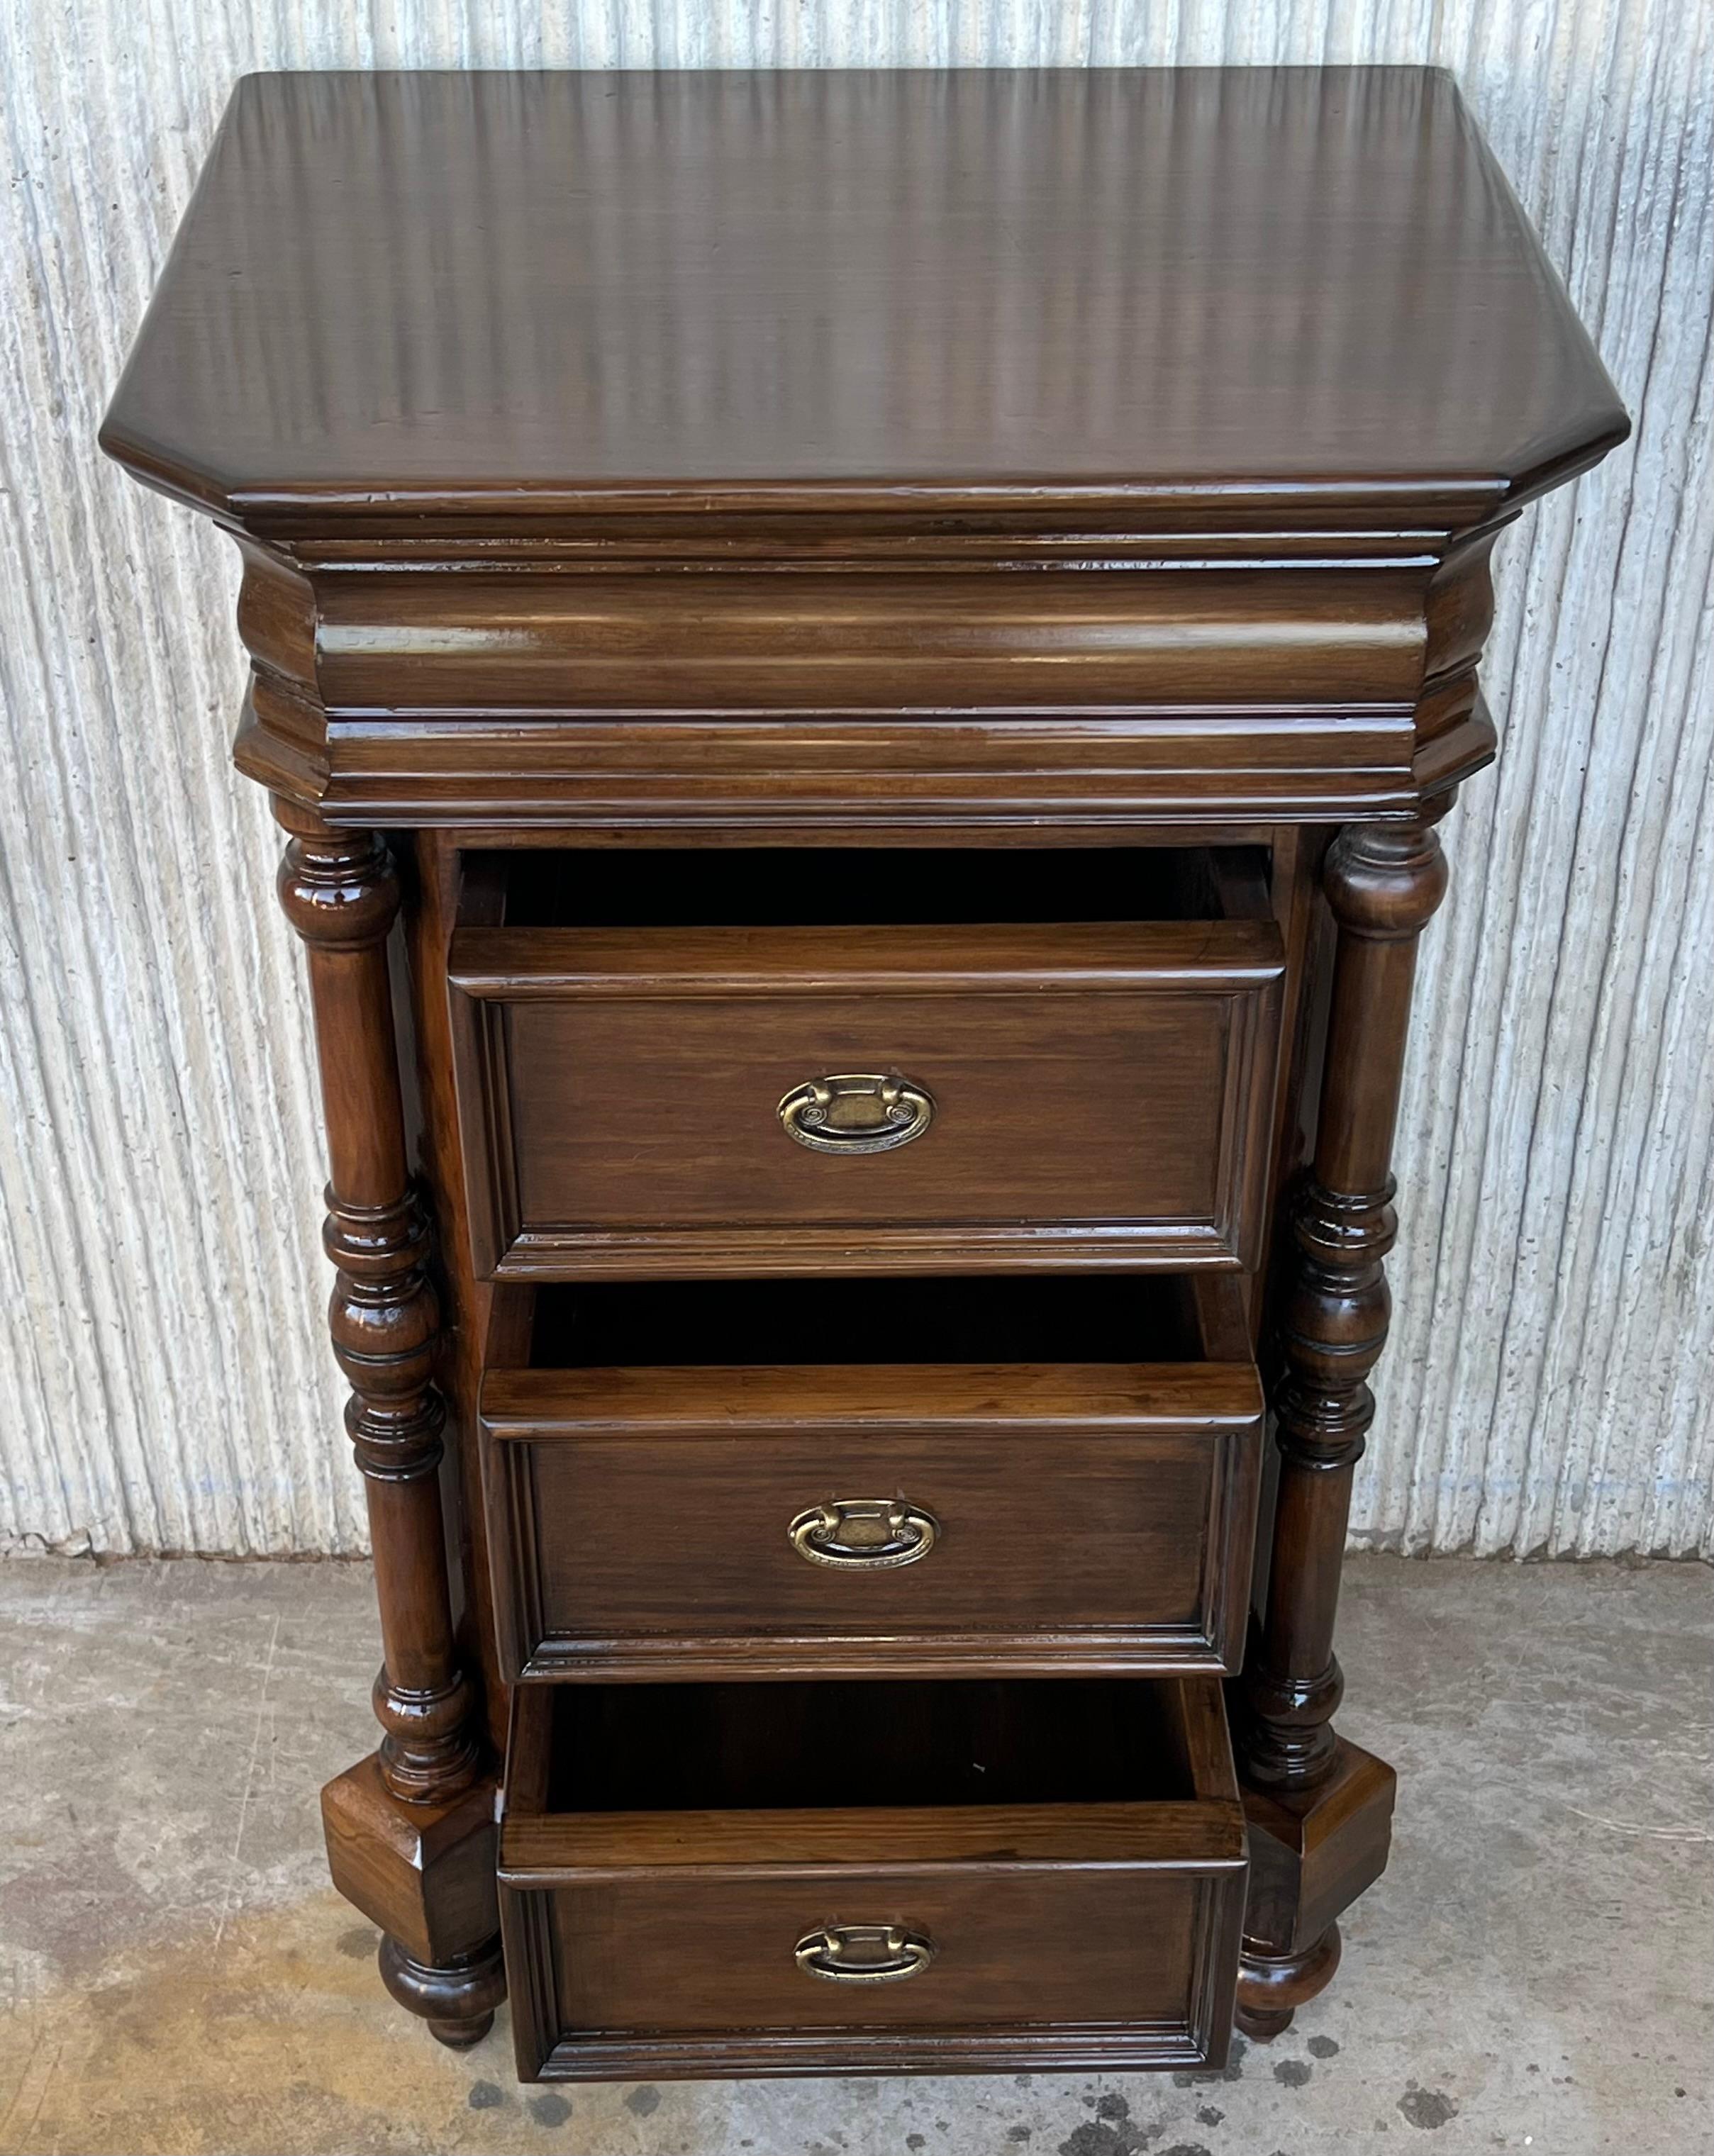 20th Century Early 20th Pair of Biedermeier Style Nightstands with Four Drawers For Sale